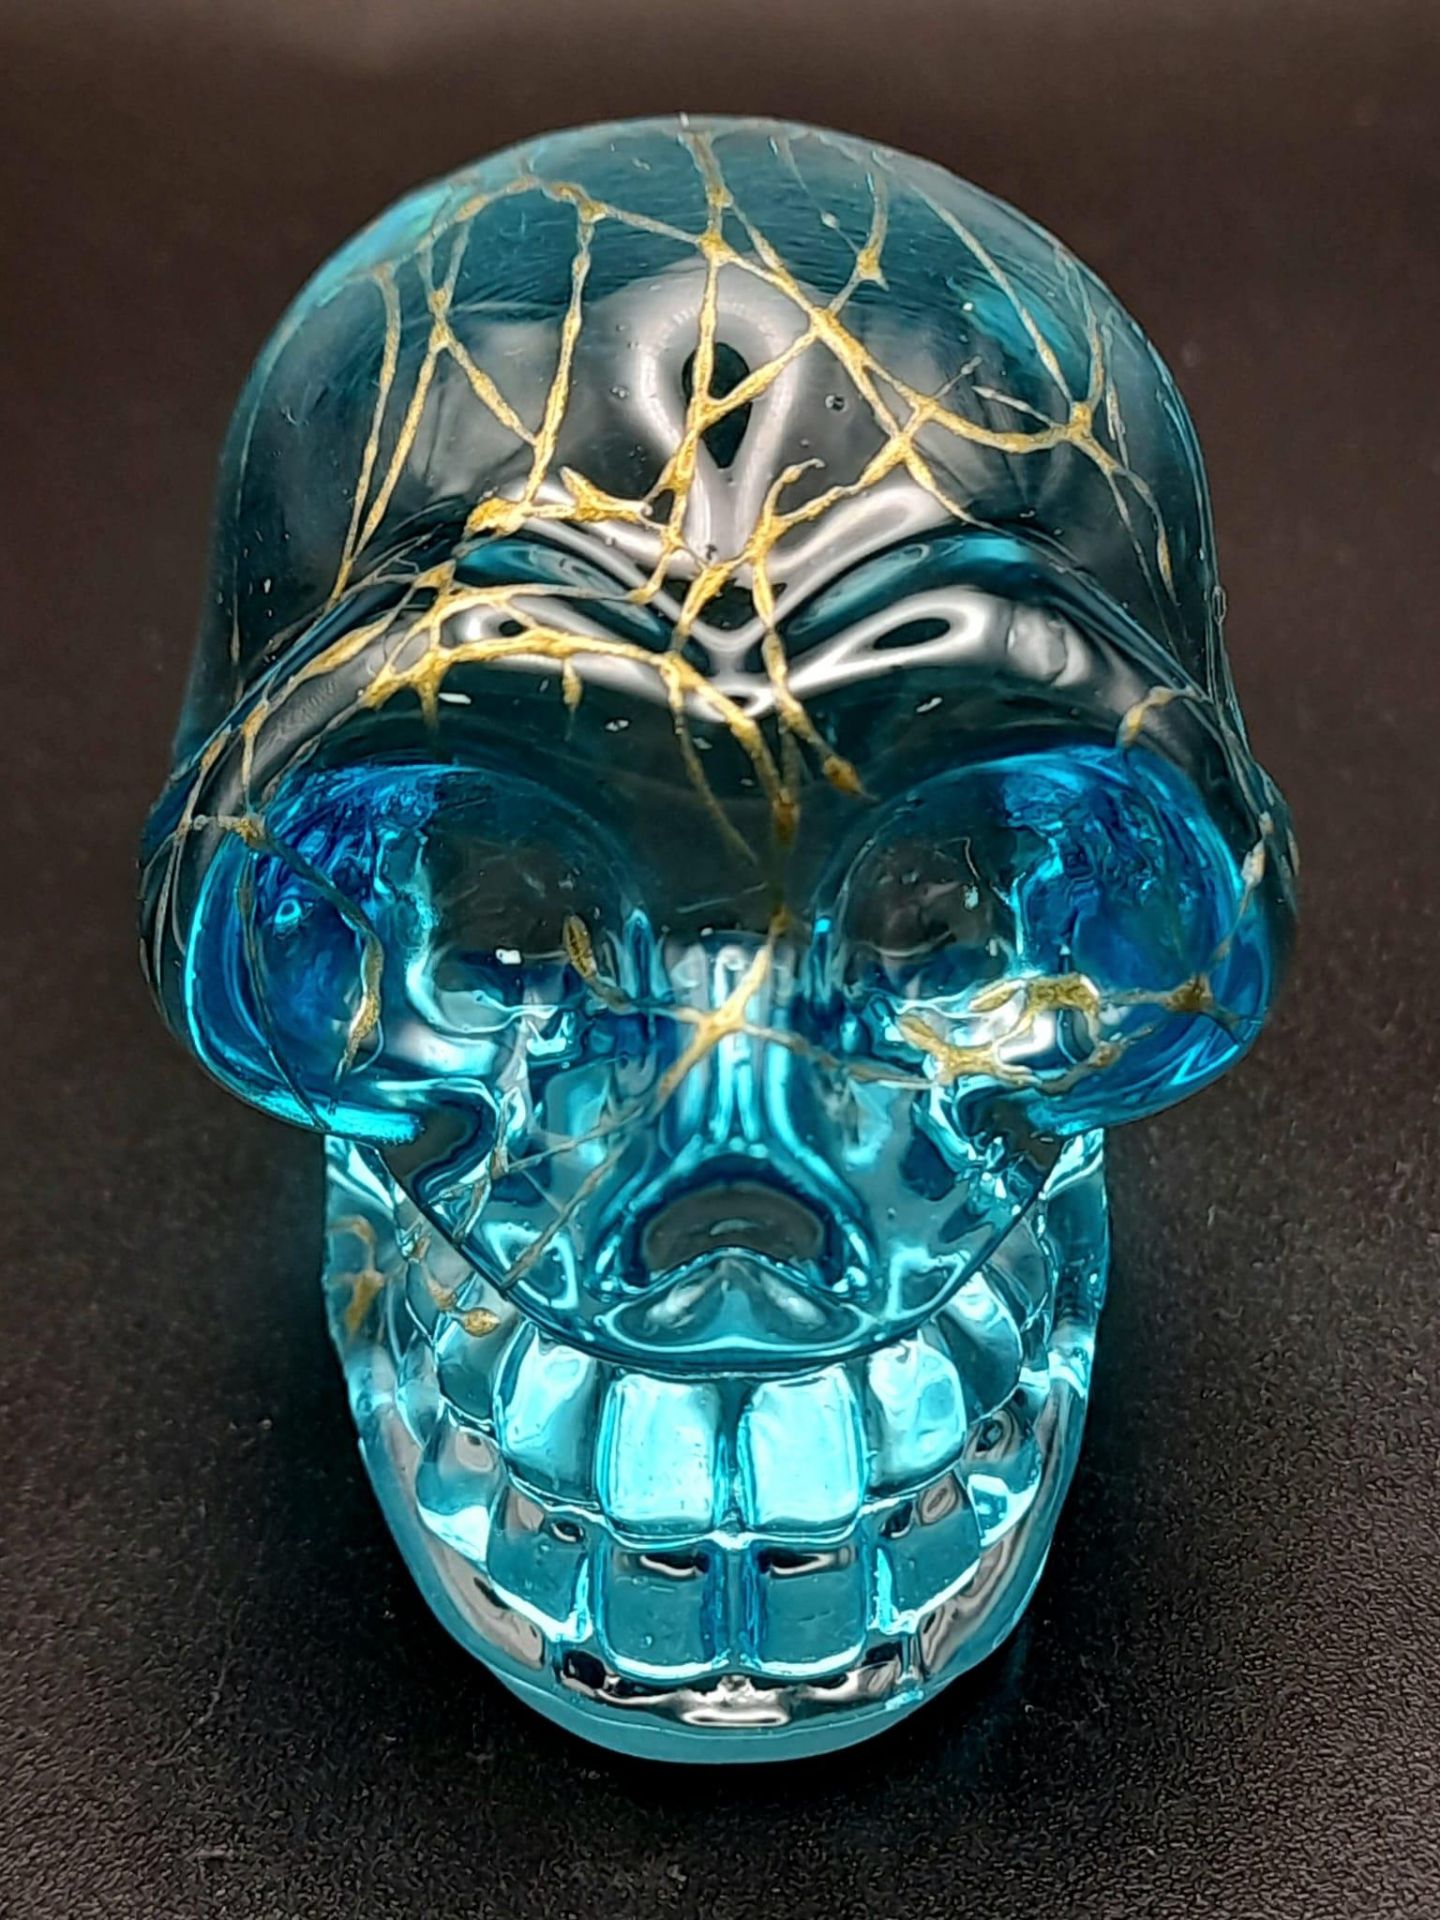 A Hand-Carved Blue Crystal Quartz Skull Figure. Paperweight or curiosity. %cm x 4cm